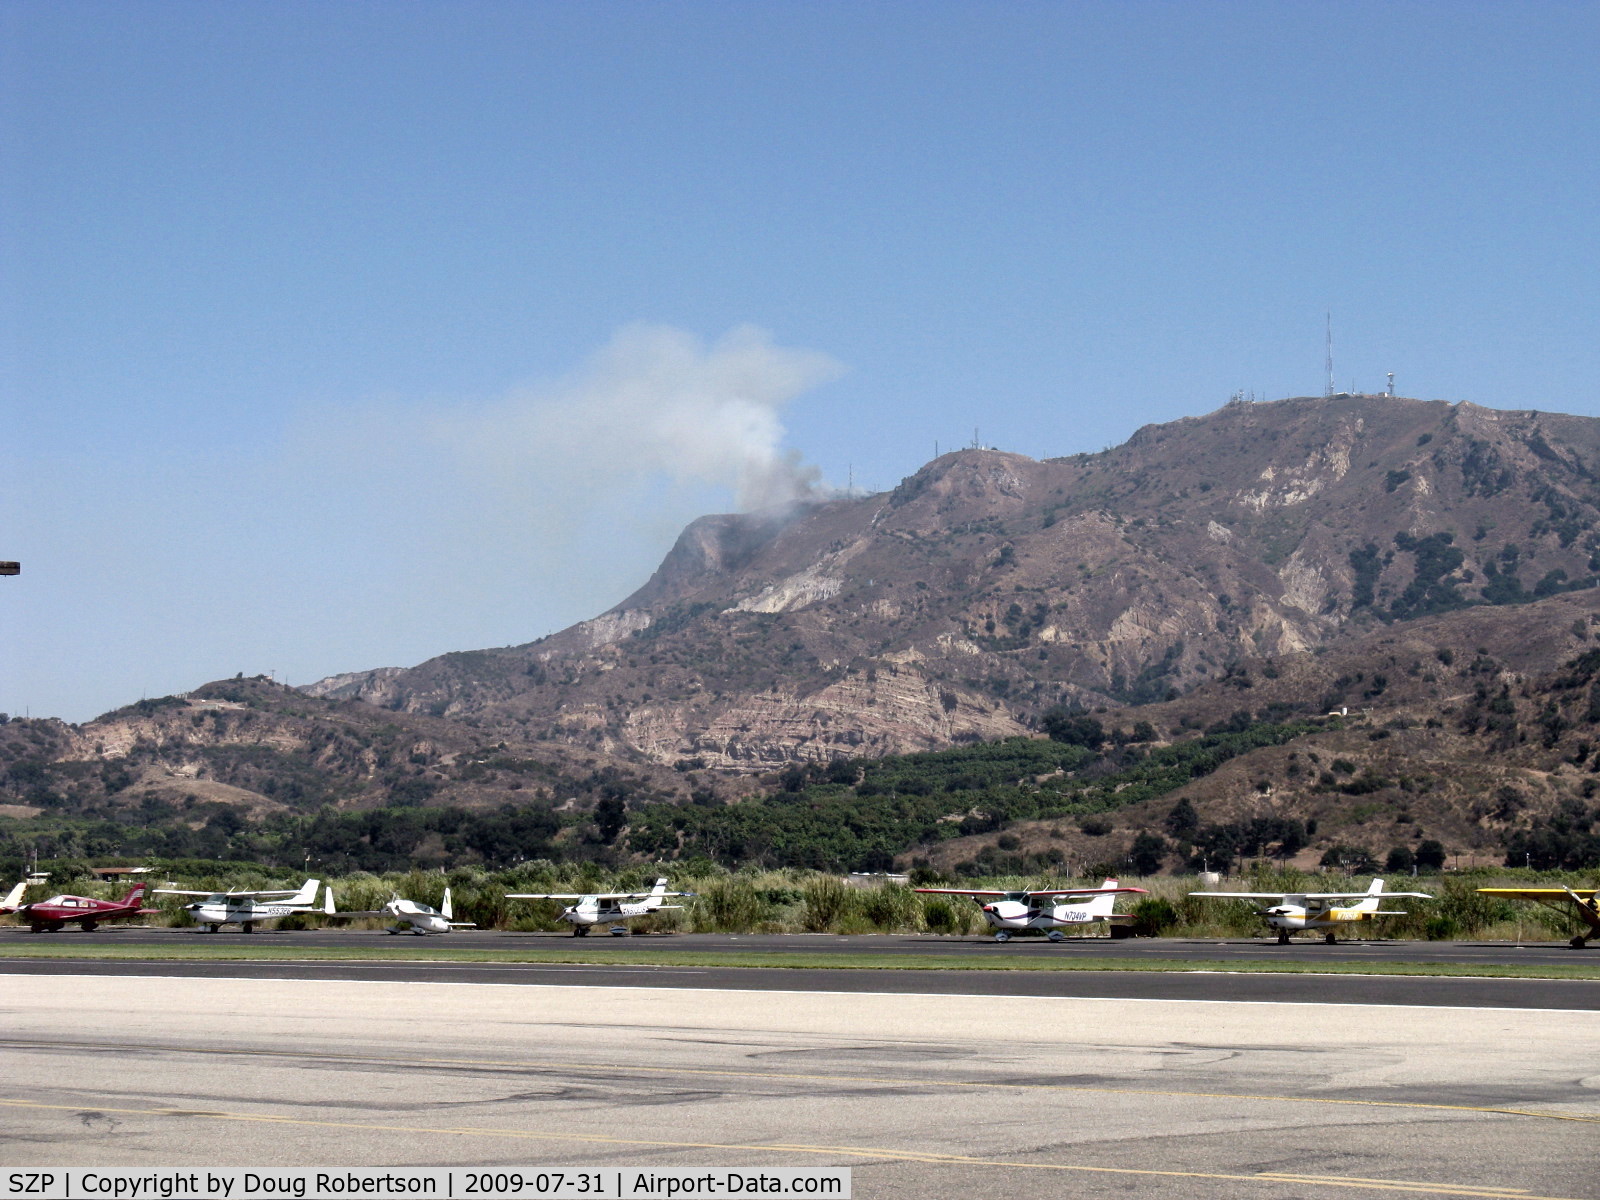 Santa Paula Airport (SZP) - Photo 1. South Mountain new fire just noted. Fire Department called.